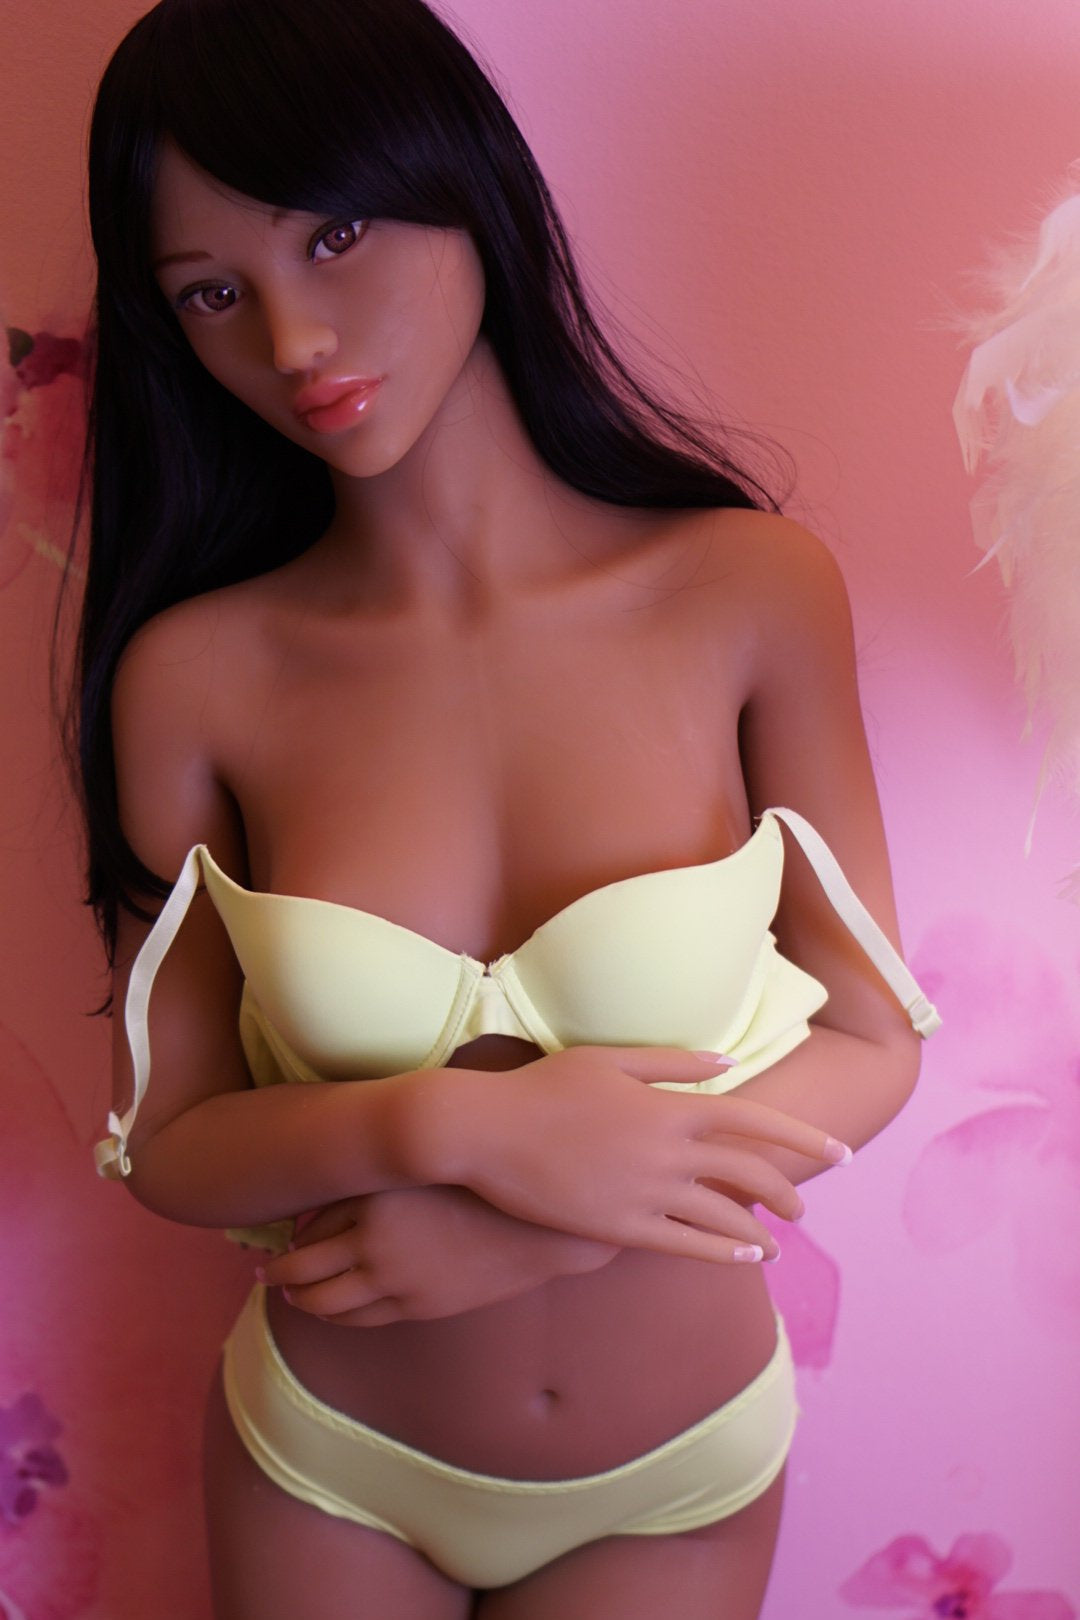 Doll Forever - Realistic Sex Doll - 5ft 5in (165cm) - Aaliyah - Love Dolls 4U